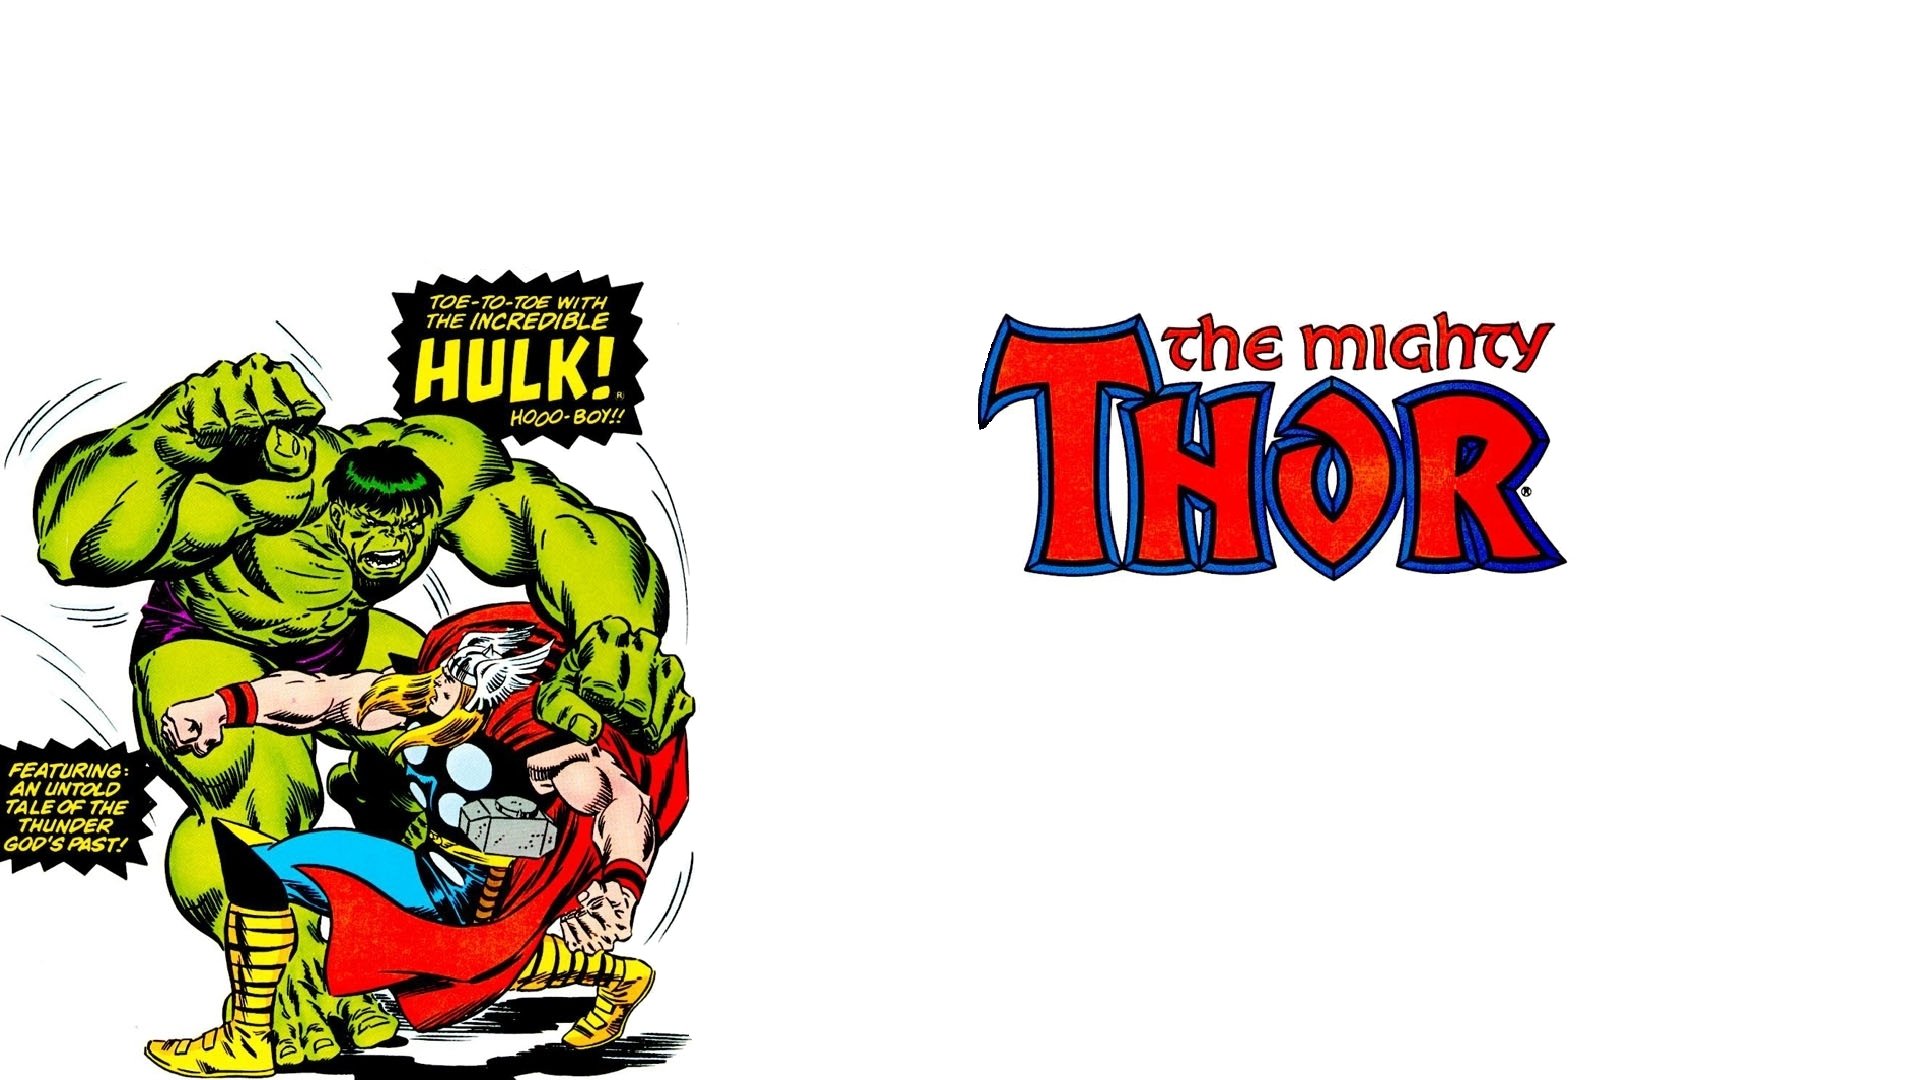 The Mighty Thor #4